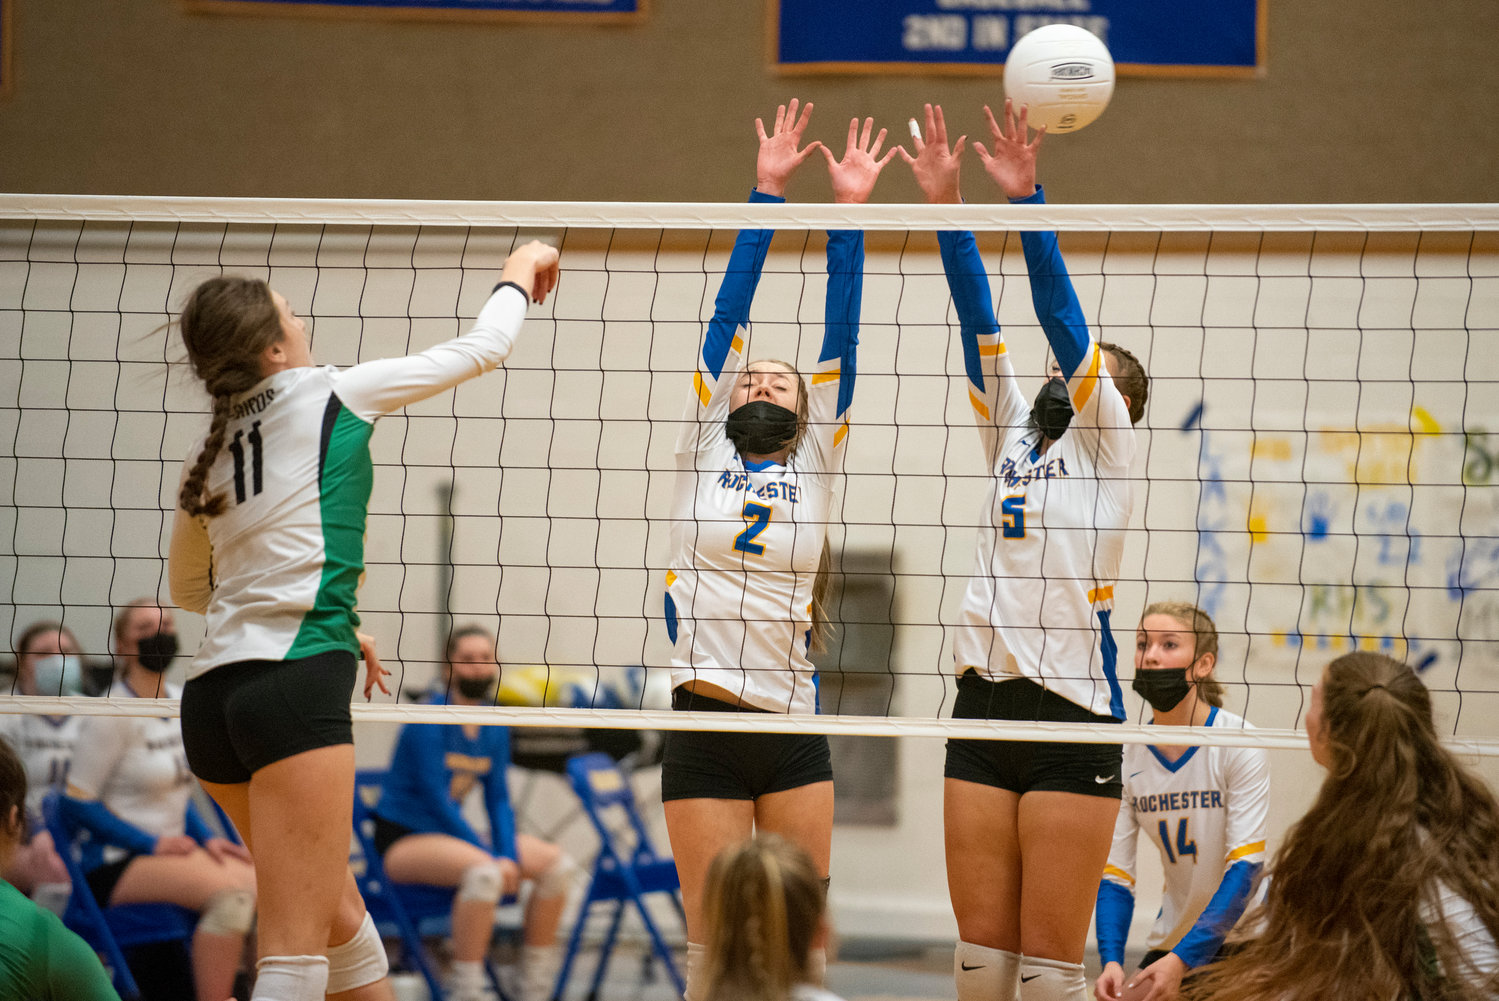 Tumwater's Kira Turcotte (11) leaps for a spike against Rochester's Kassidy Byrd (2) and Roisin Stull (5) during a 2A Evergreen Conference match in Rochester on Oct. 19, 2021.